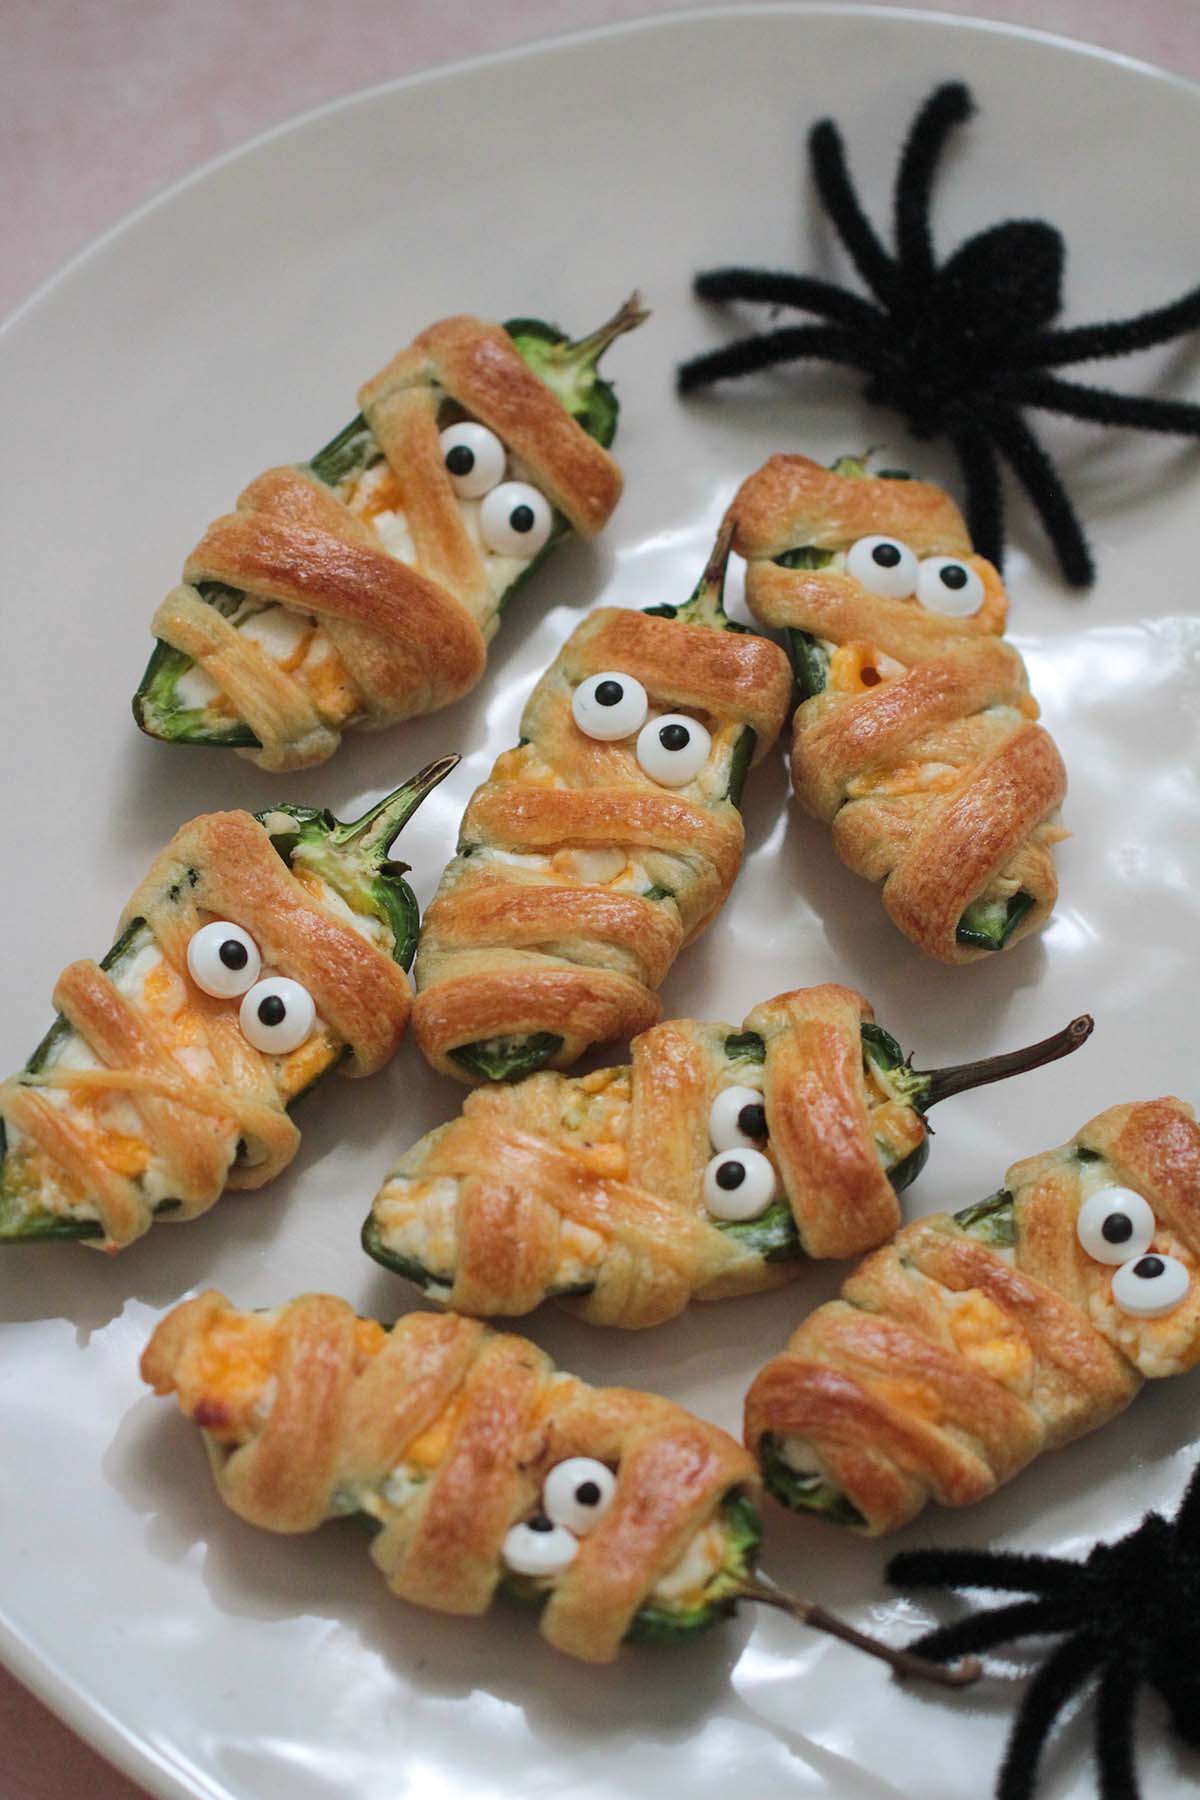 seven mummy jalapeno poppers on a white plate with 2 fake spiders.